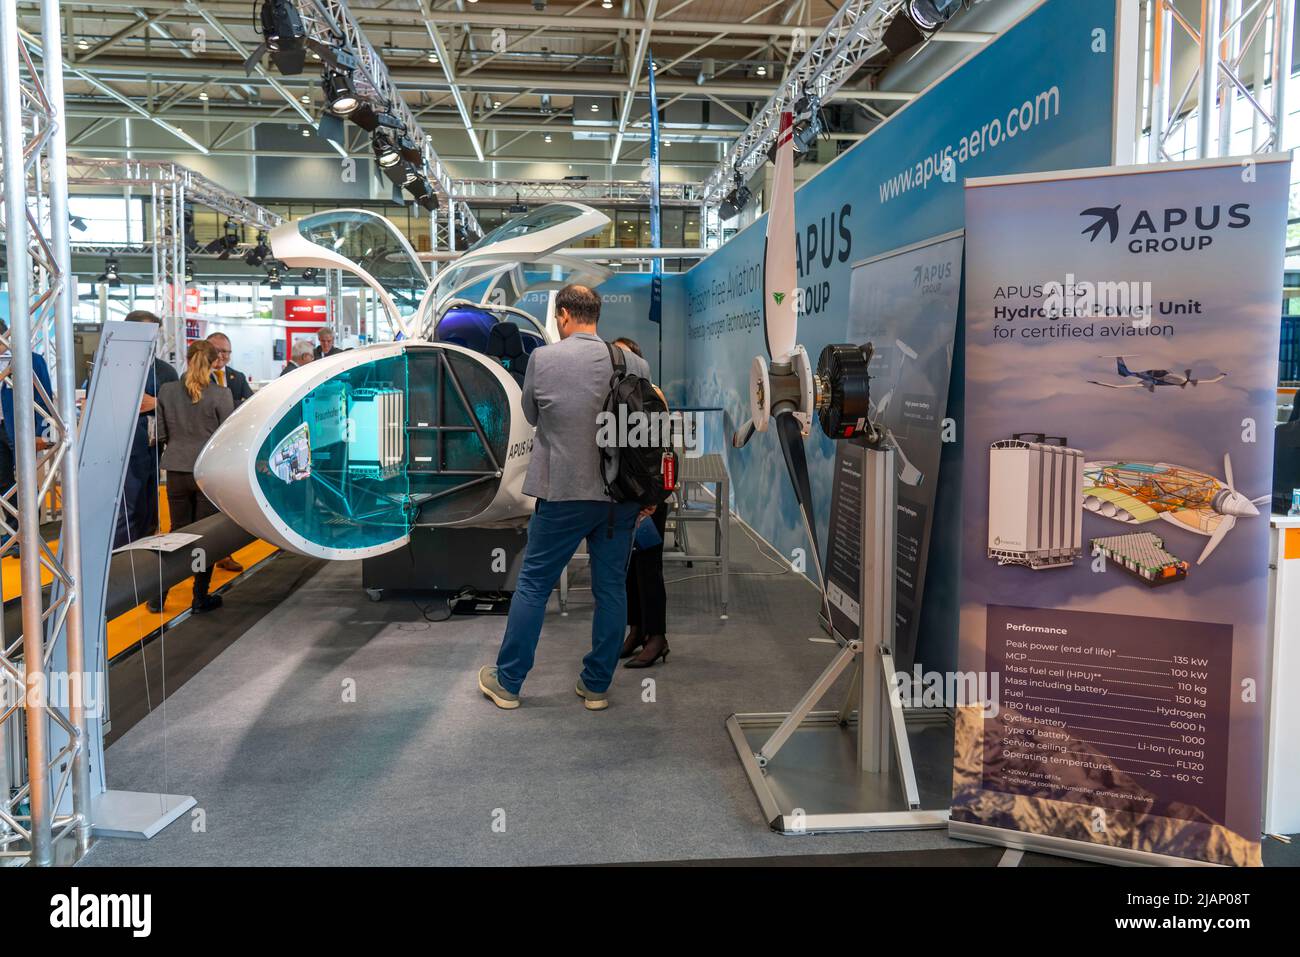 First day at Hannover Messe 2022, industrial trade fair, after 2 years of corona break, prototype of the hydrogen aircraft APUS i-2, exhibition hall f Stock Photo